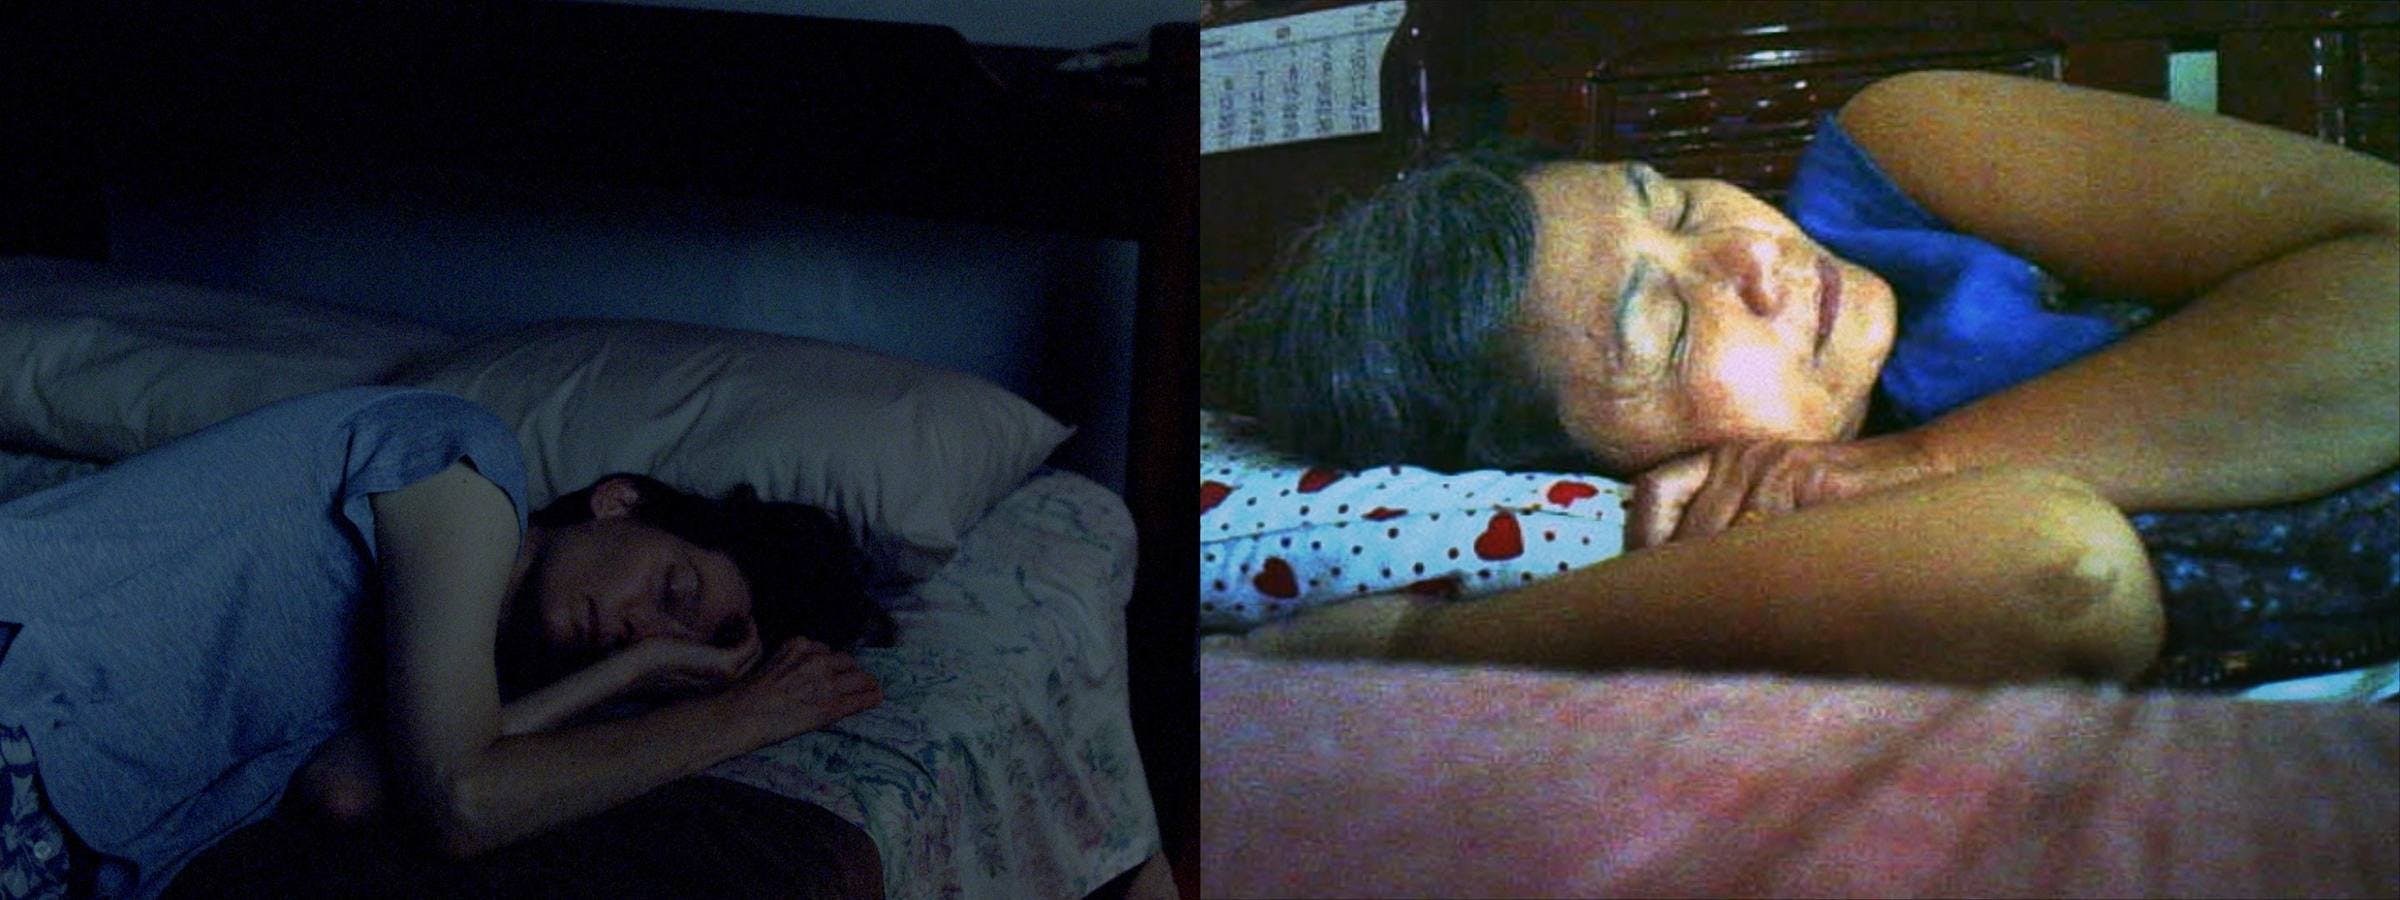 A split screen projection. On the left we can see a person sleeping, on the right we can see an elderly woman sleeping